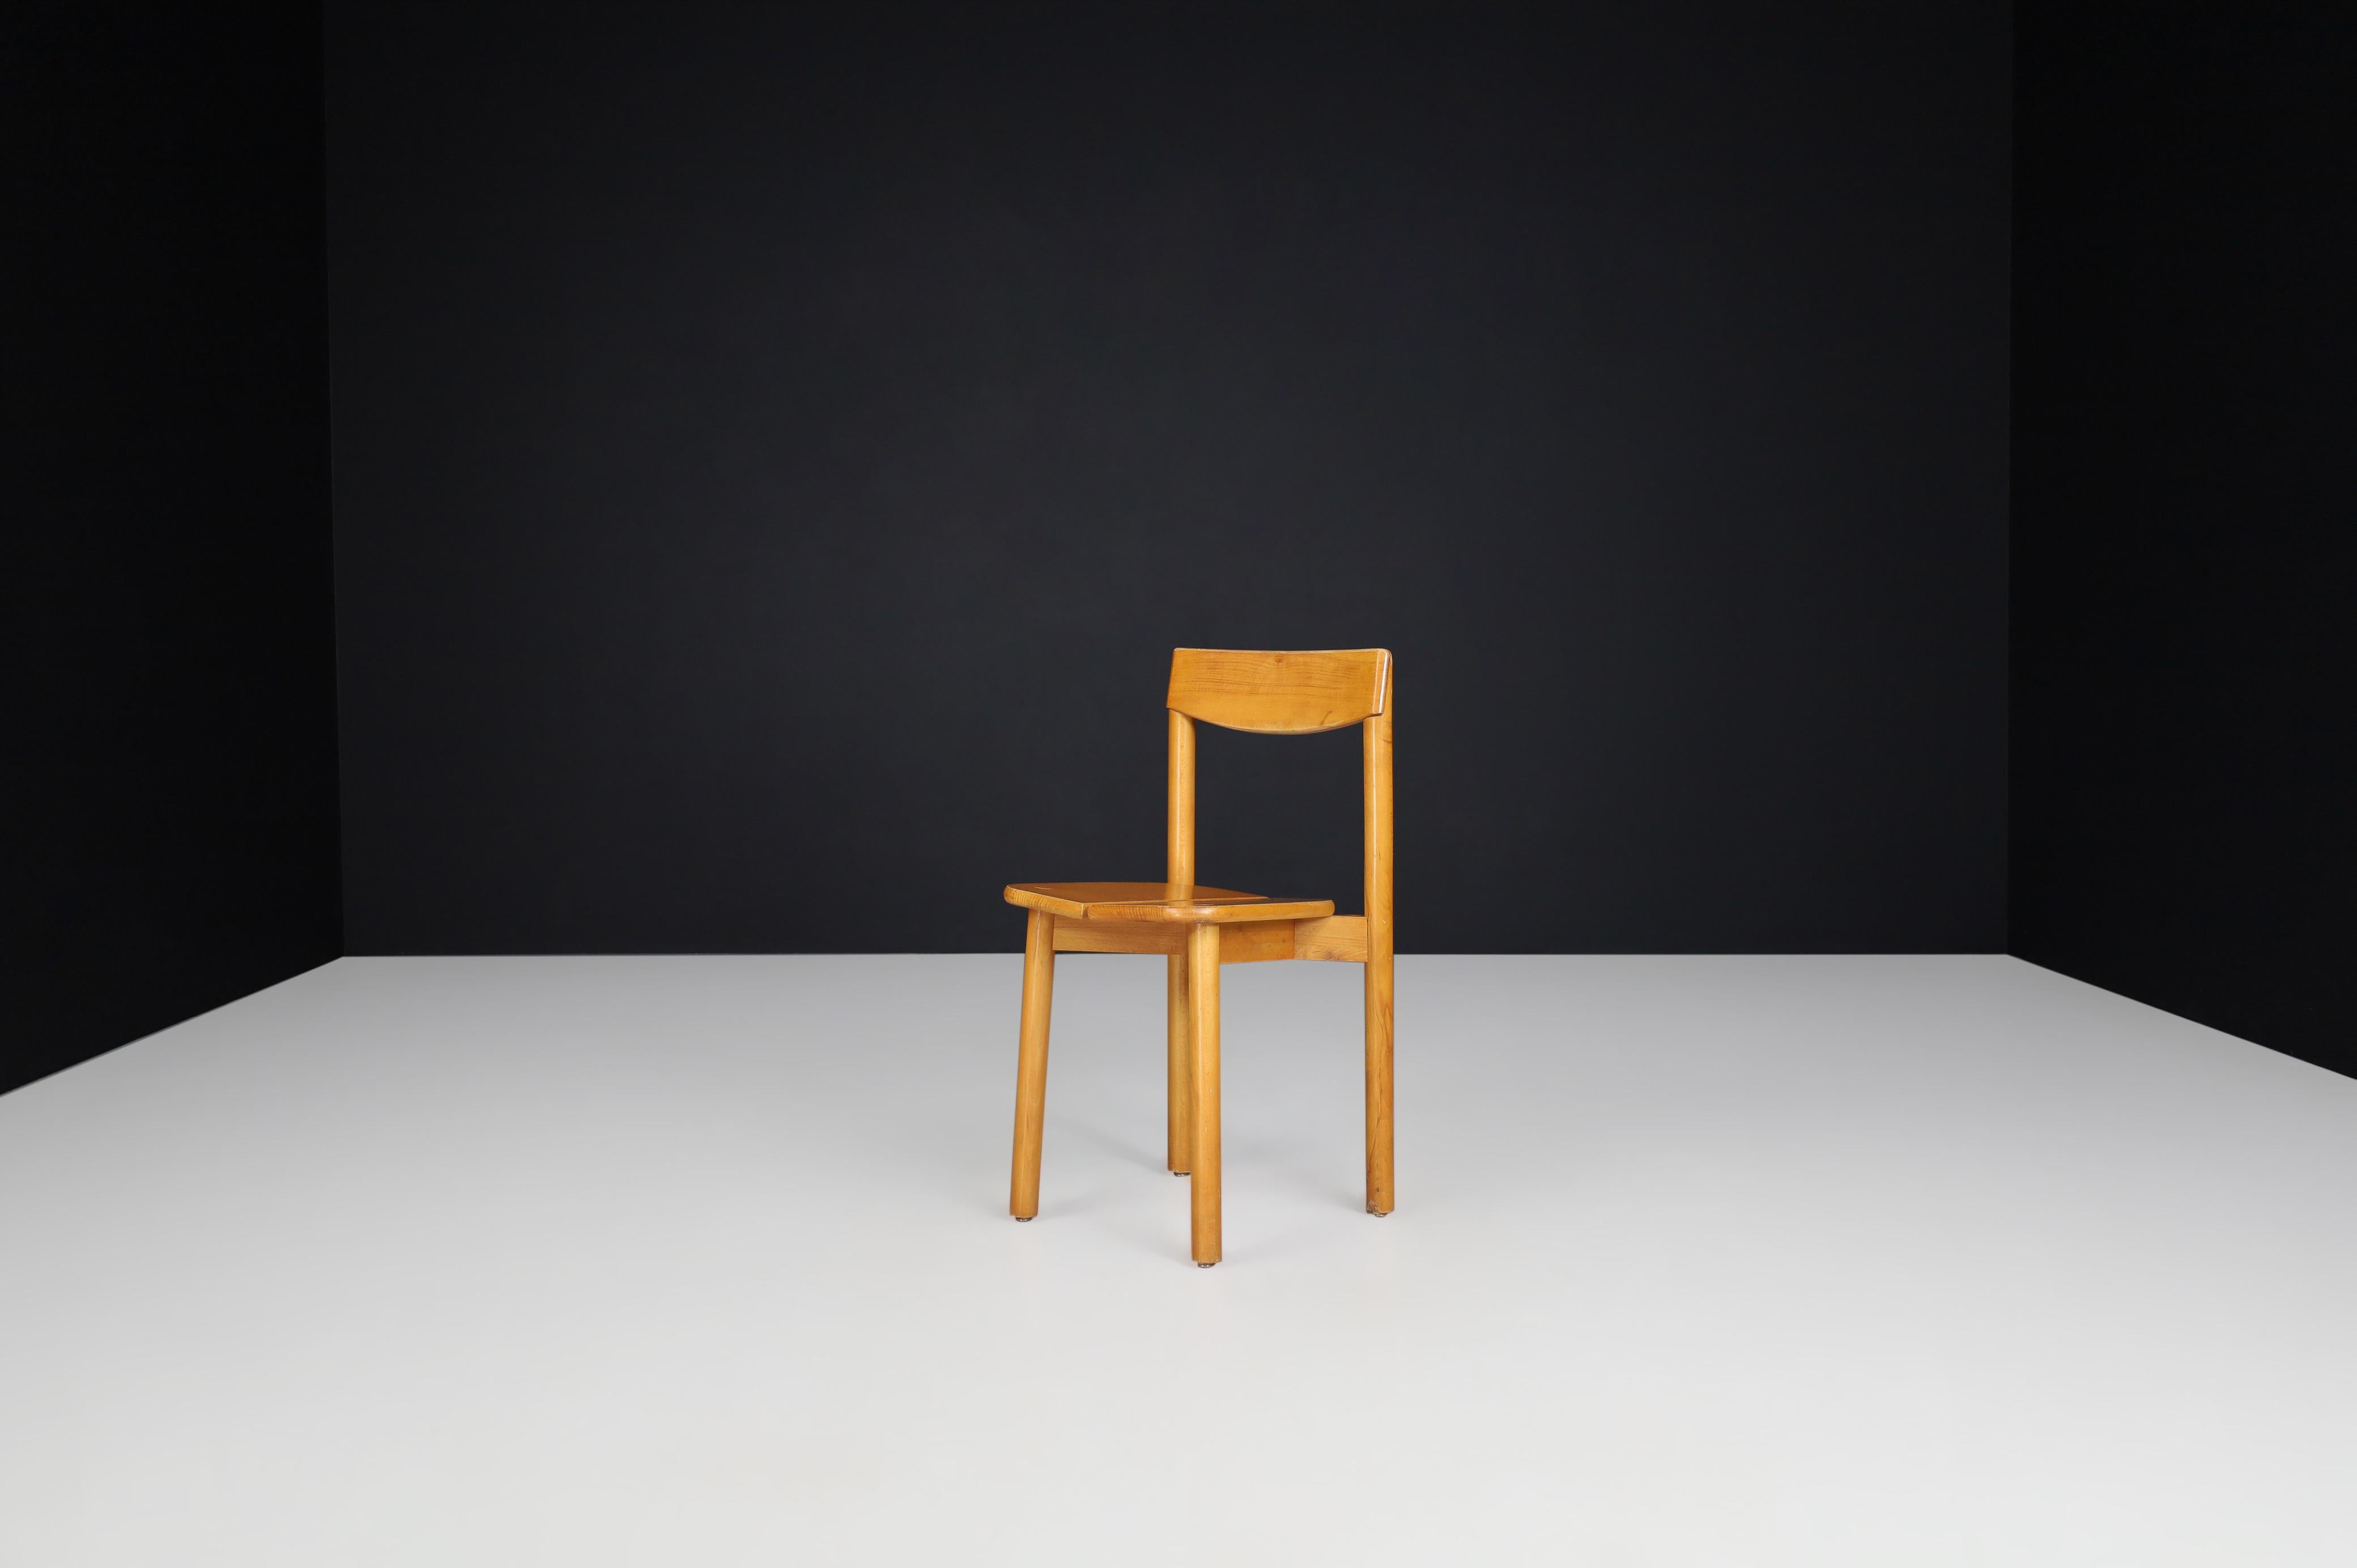 Pierre Gautier Solid Chairs in Blond Beech, France, 1960s For Sale 3